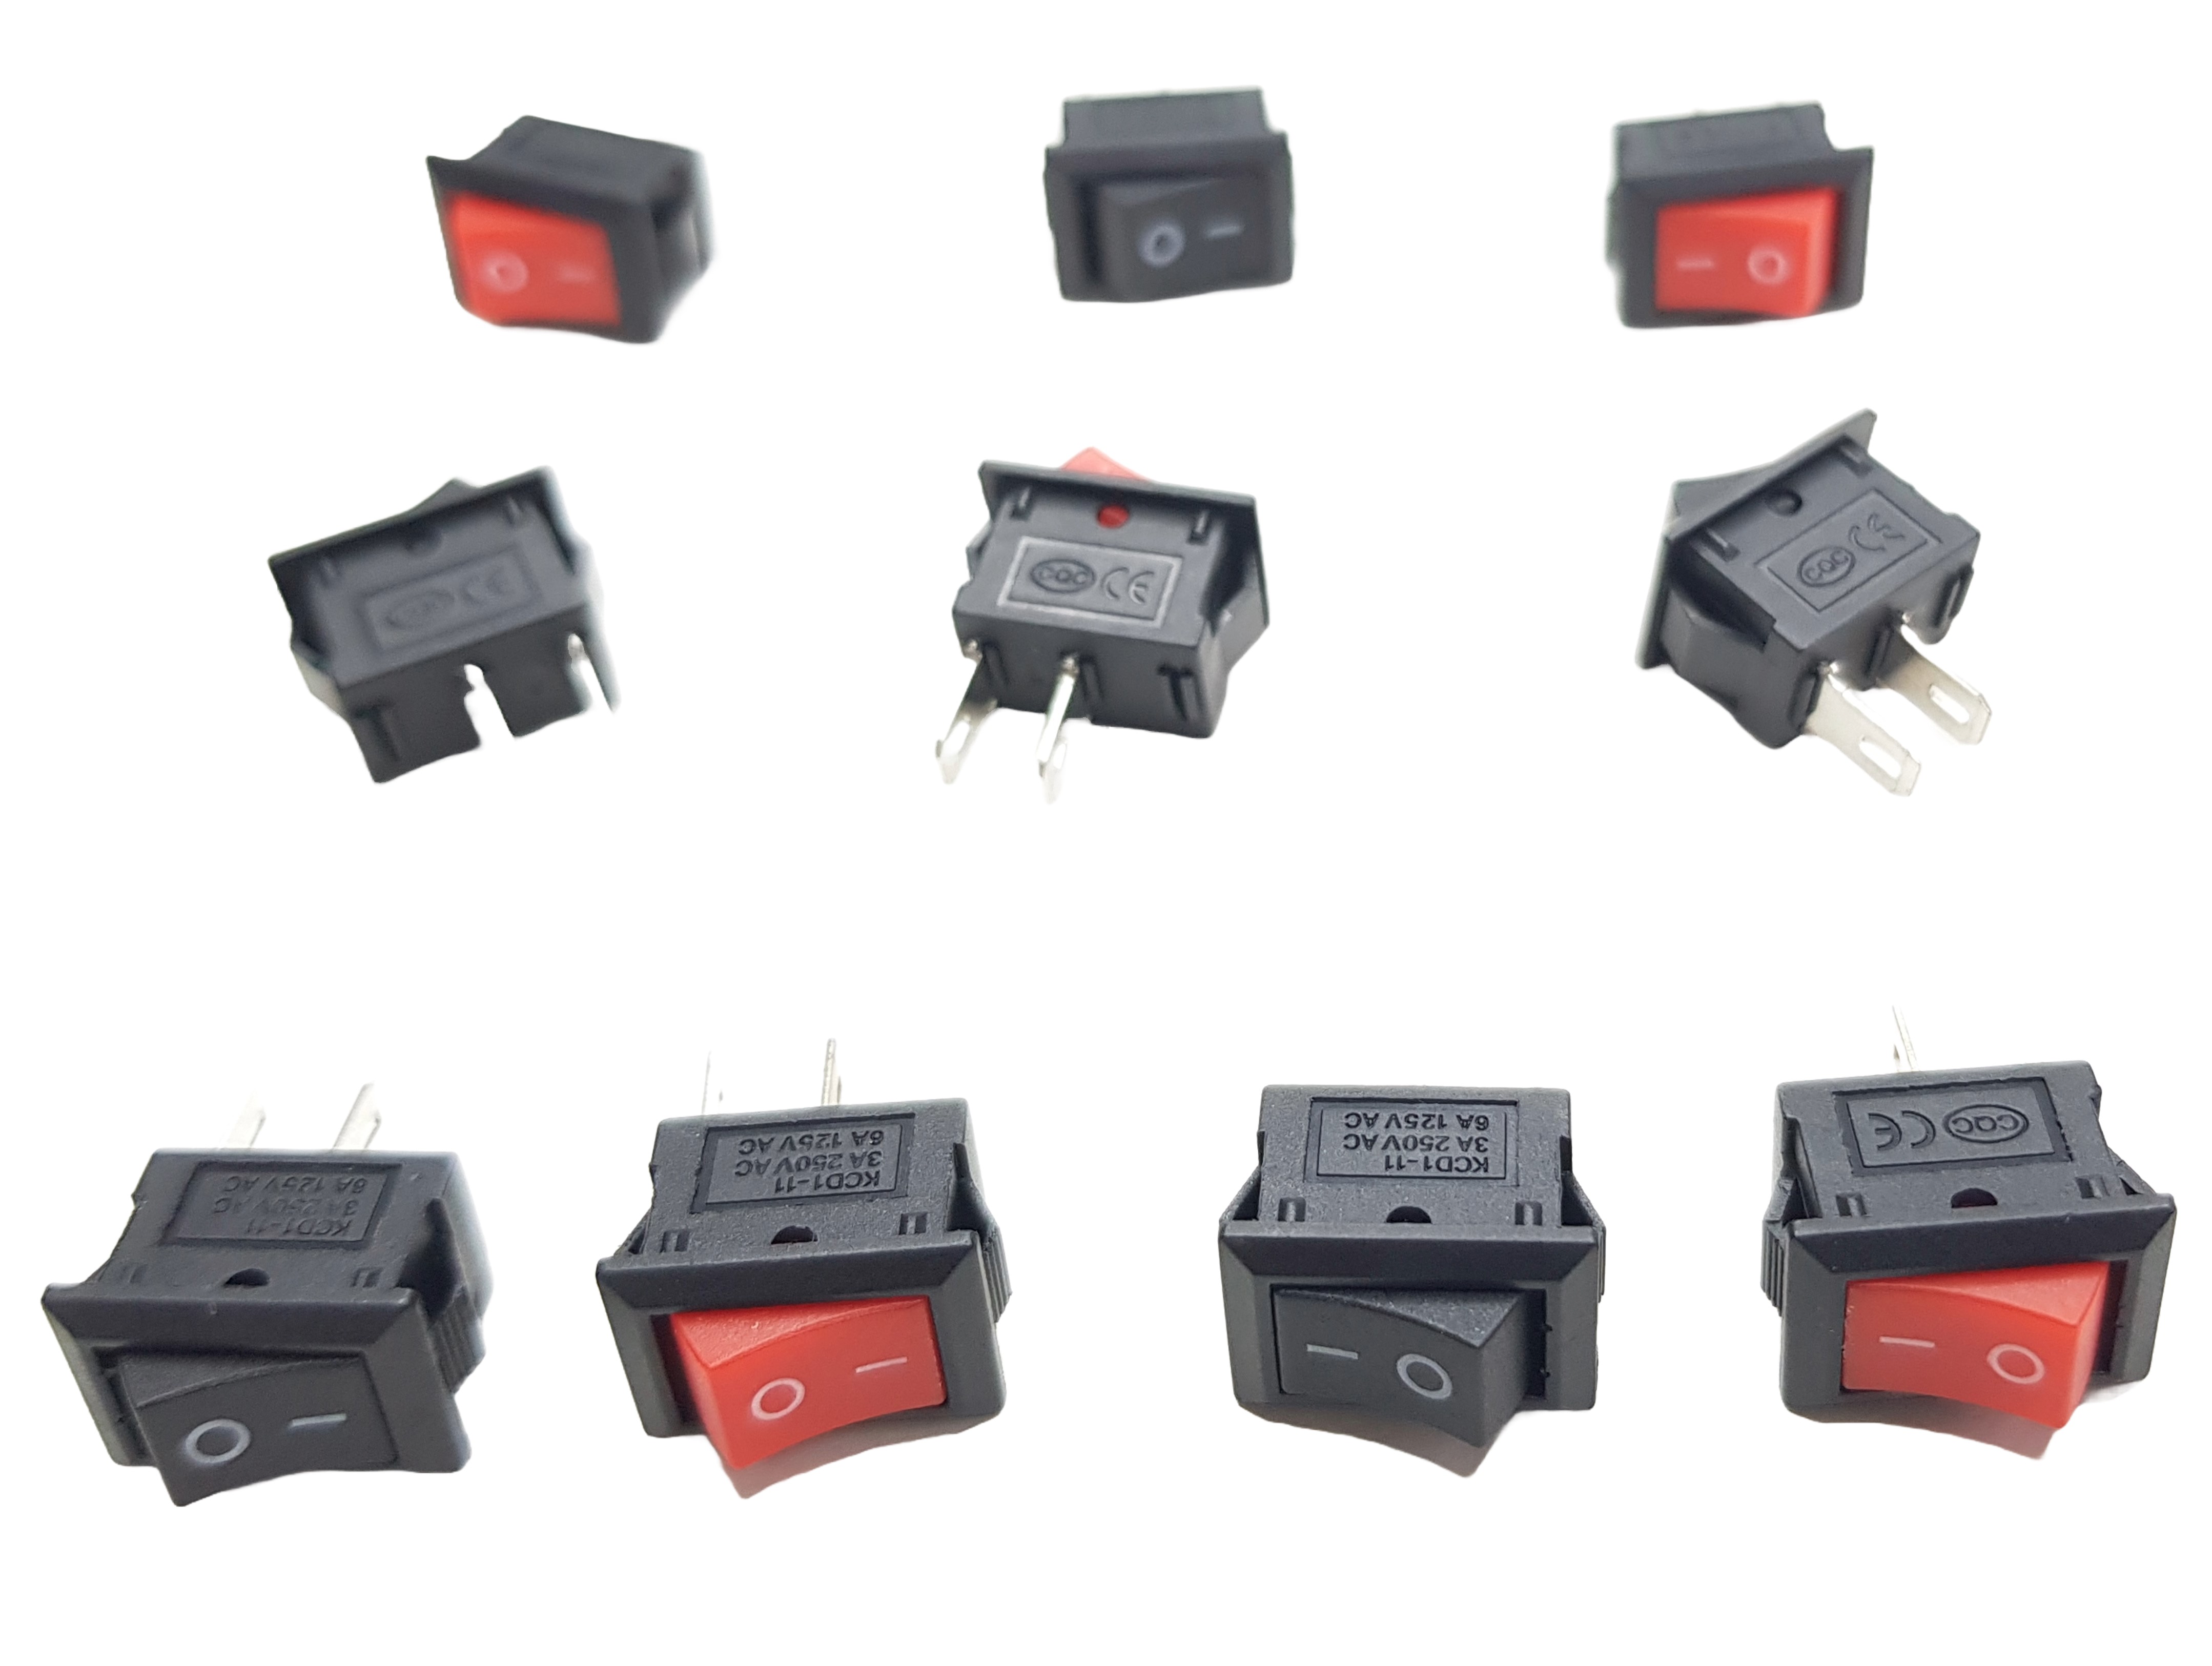 ON/OFF Rectangle Rocker Switch for Arduino, ESP32, ESP8266, Raspberry Pi, Black and Red